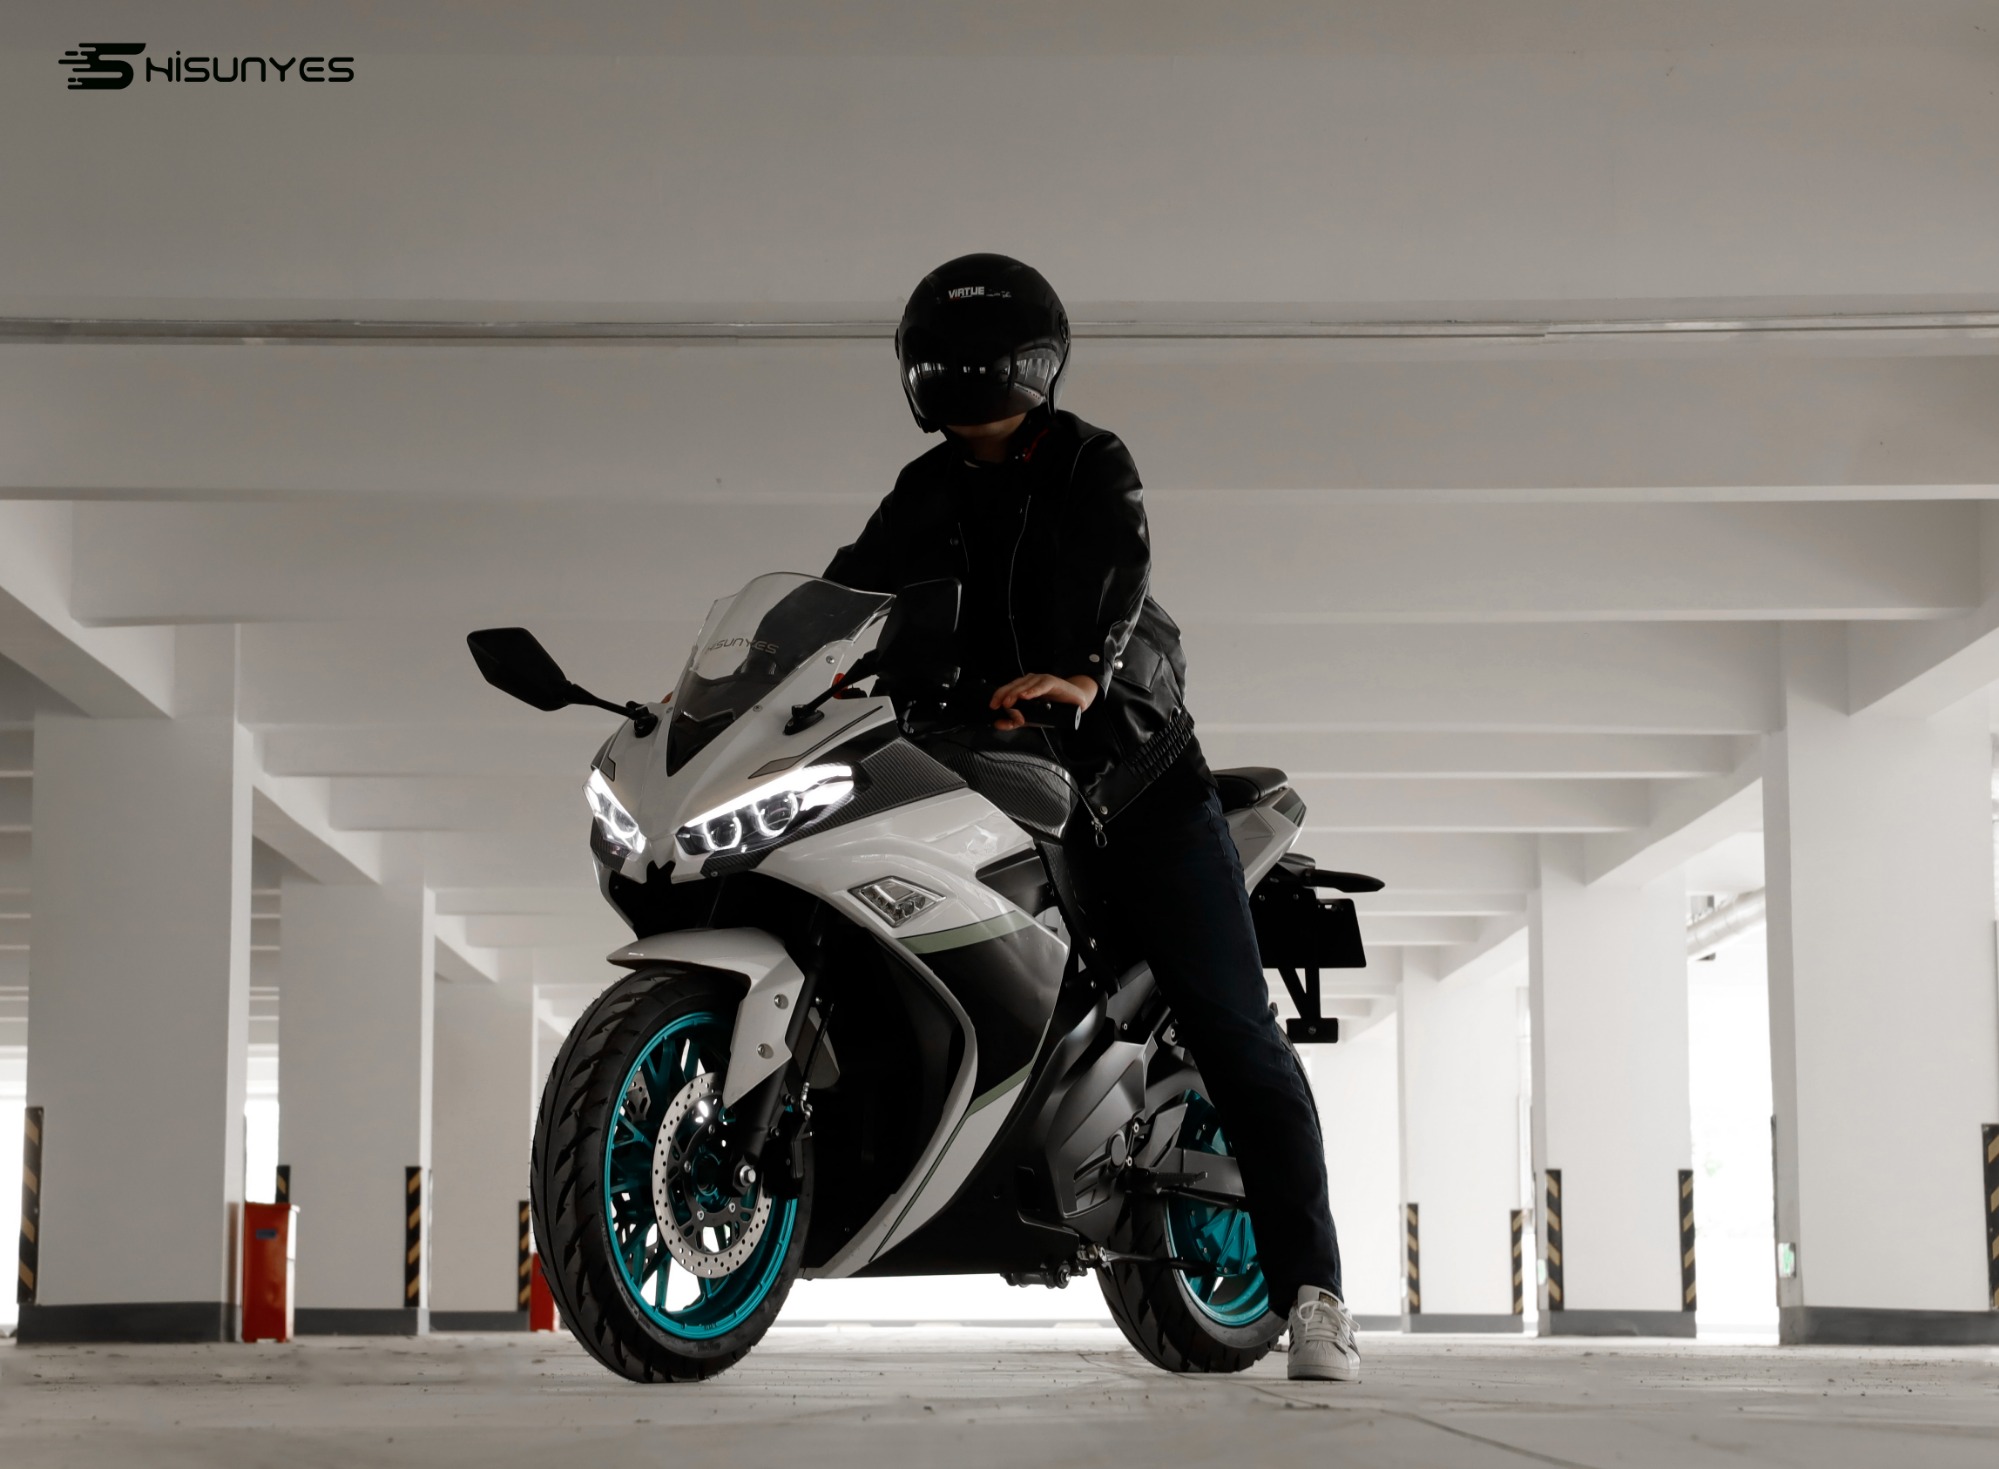 ride the  electric motorcycle V3 to see different scenery